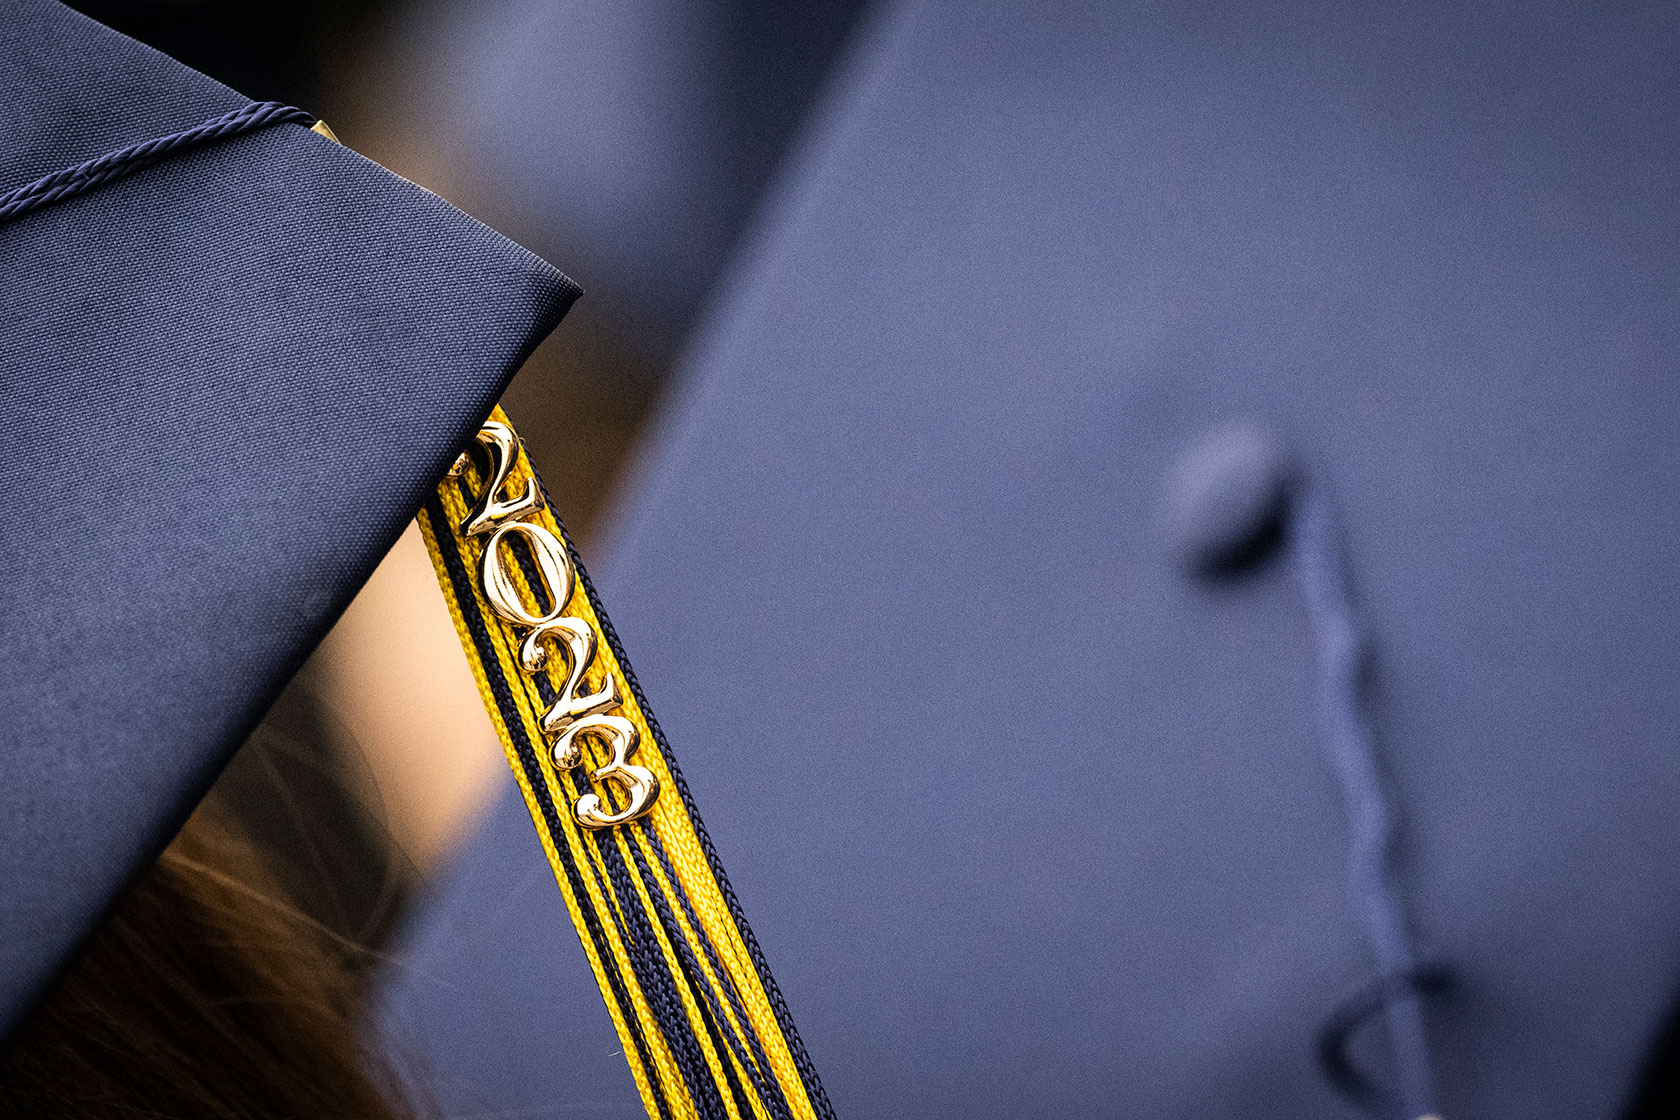 A “class of 2023” cap and tassel are seen.